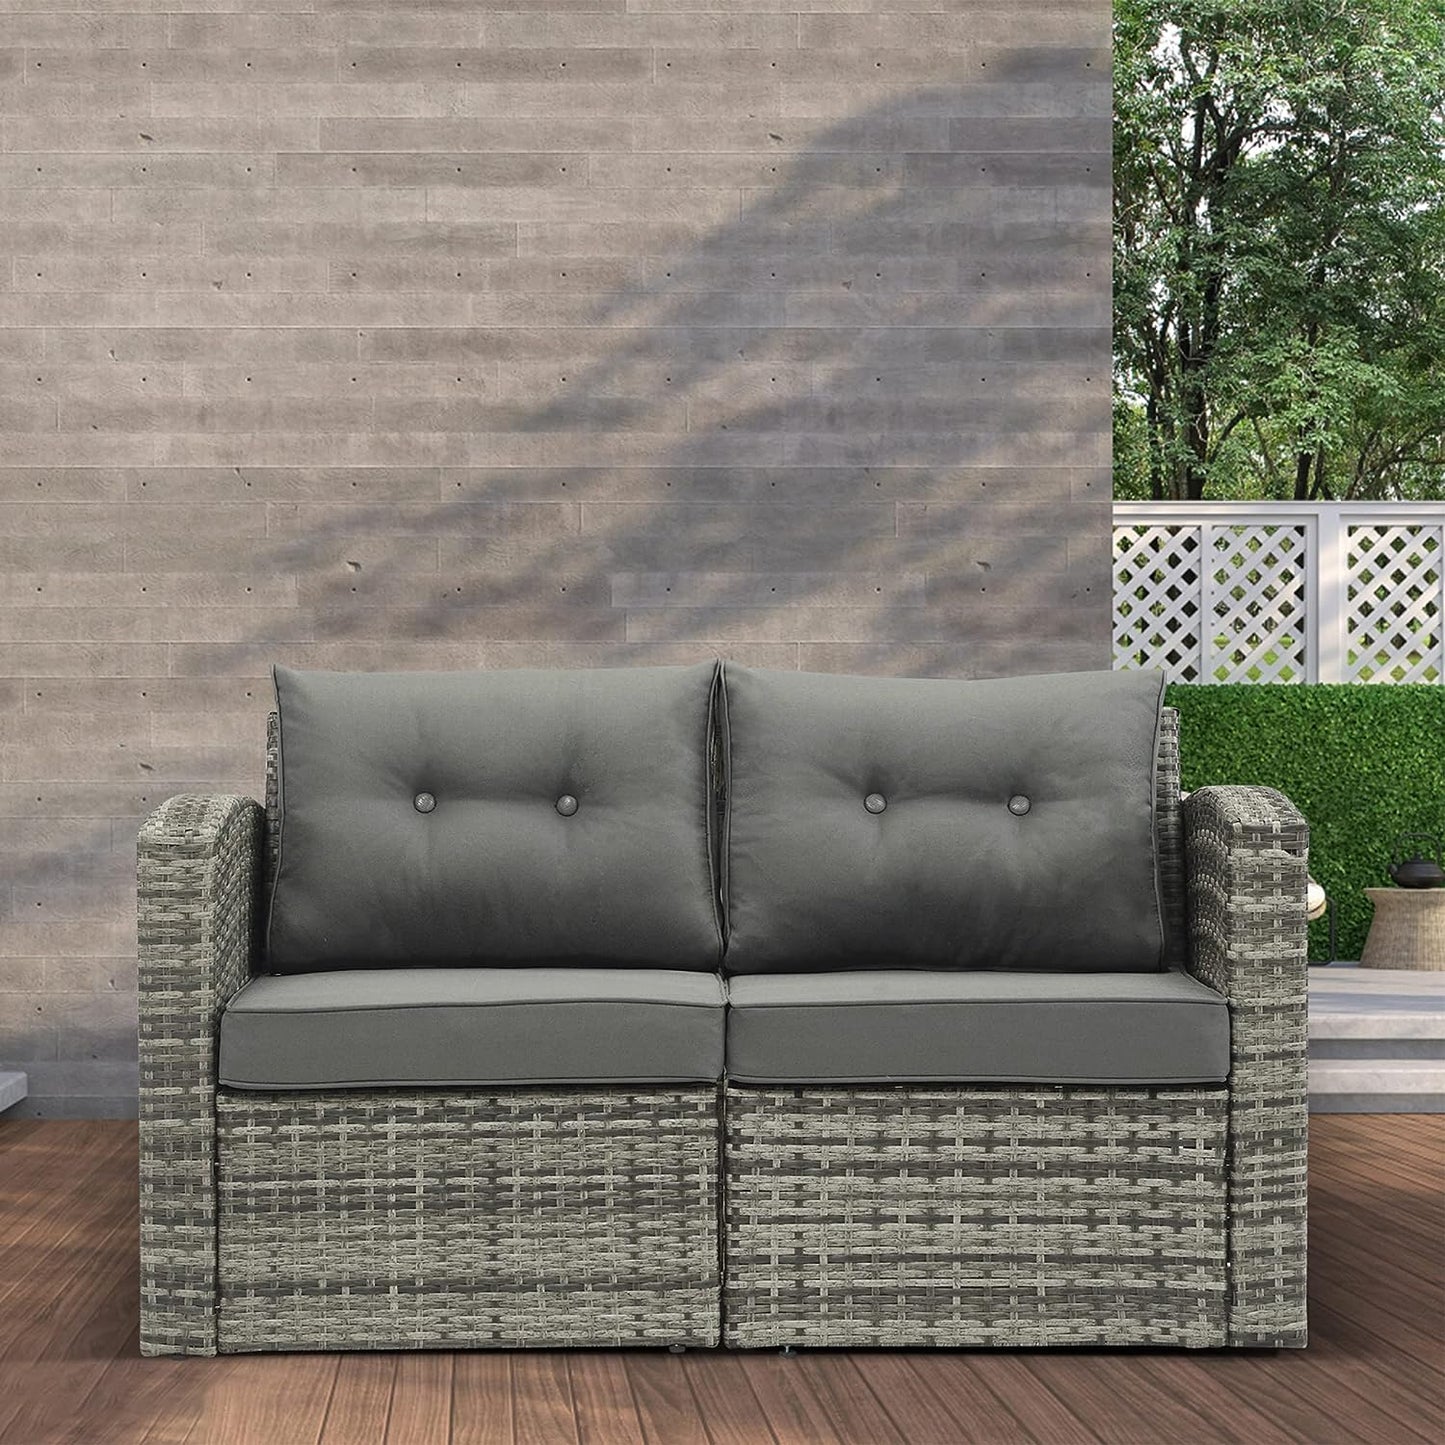 Outdoor Loveseat Patio Furniture Corner Sofa, All-Weather Grey Wicker 2-Piece Rattan Outdoor Sectional Couch Sofa Set with Dark Grey Non-Slip Cushions,Aluminum Frame